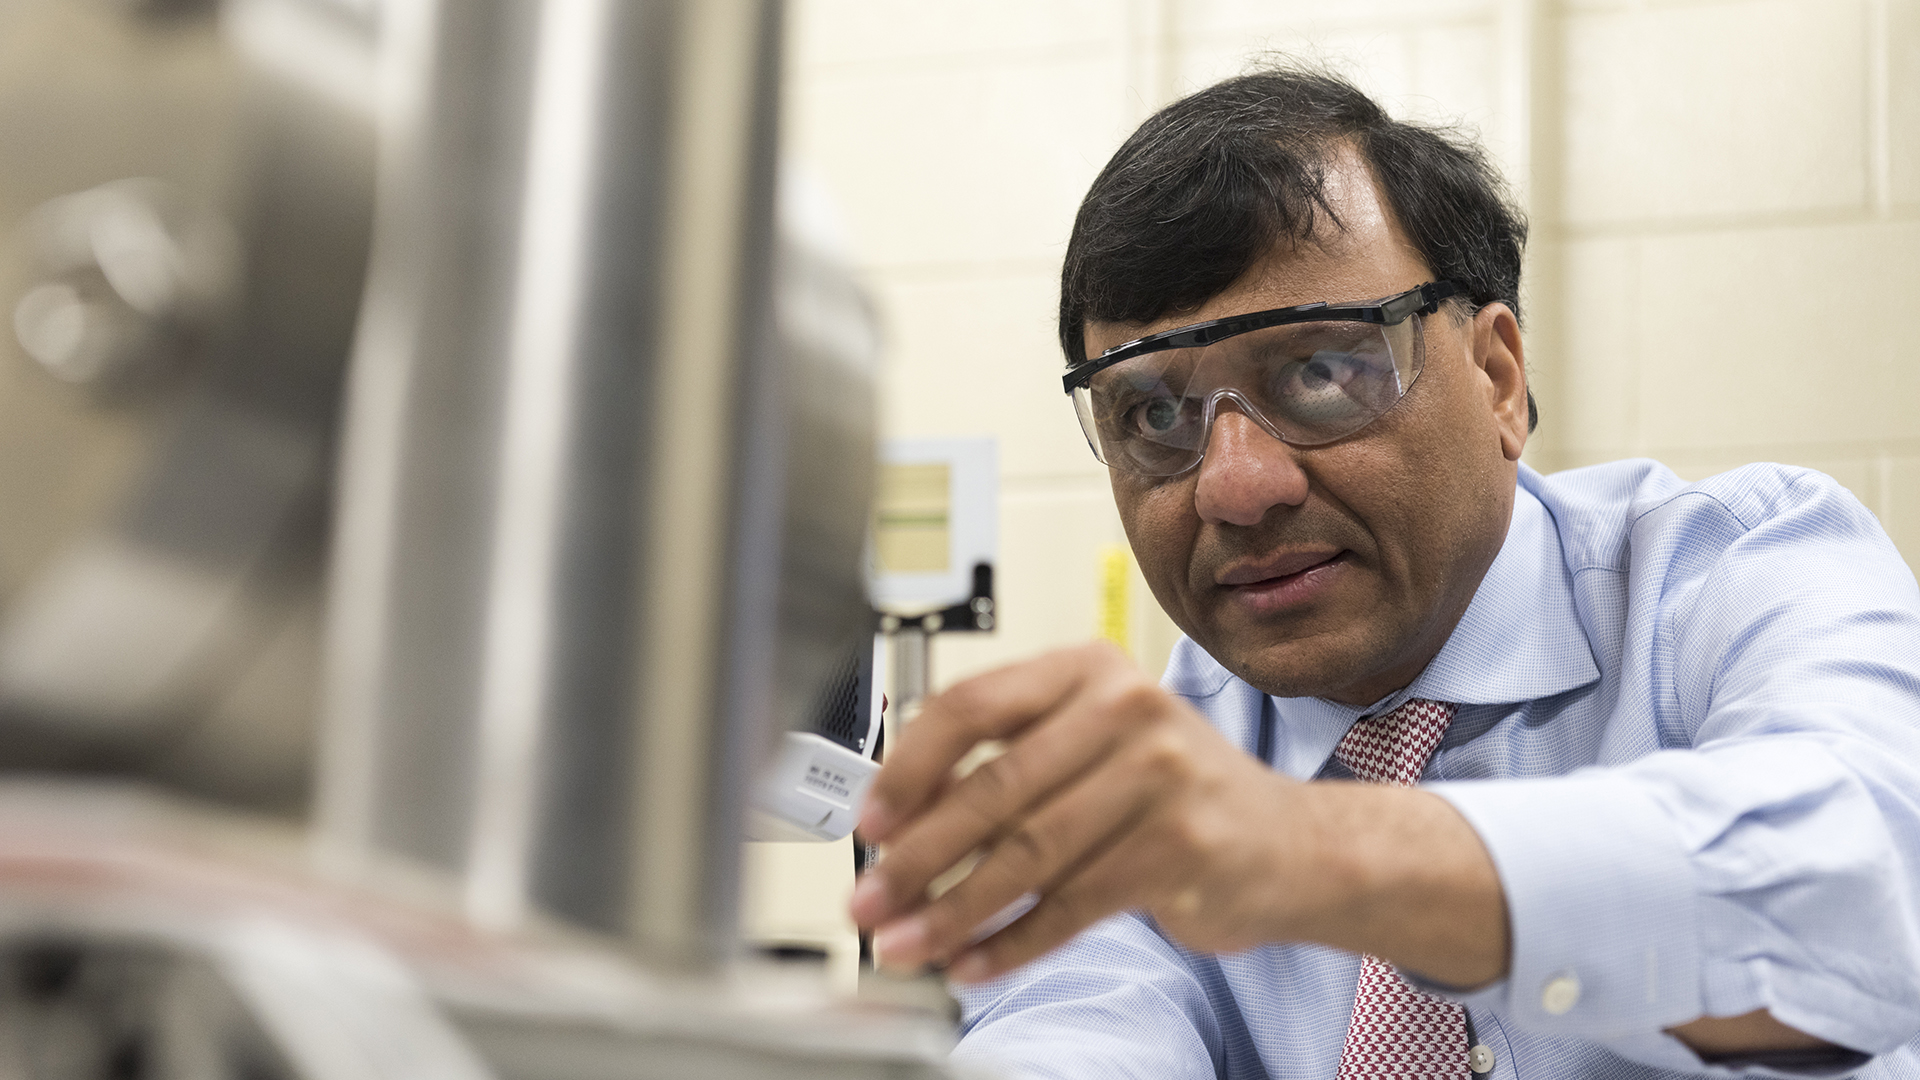 Dr. Ajay K. Agrawal working in safety goggles on some metal pipes